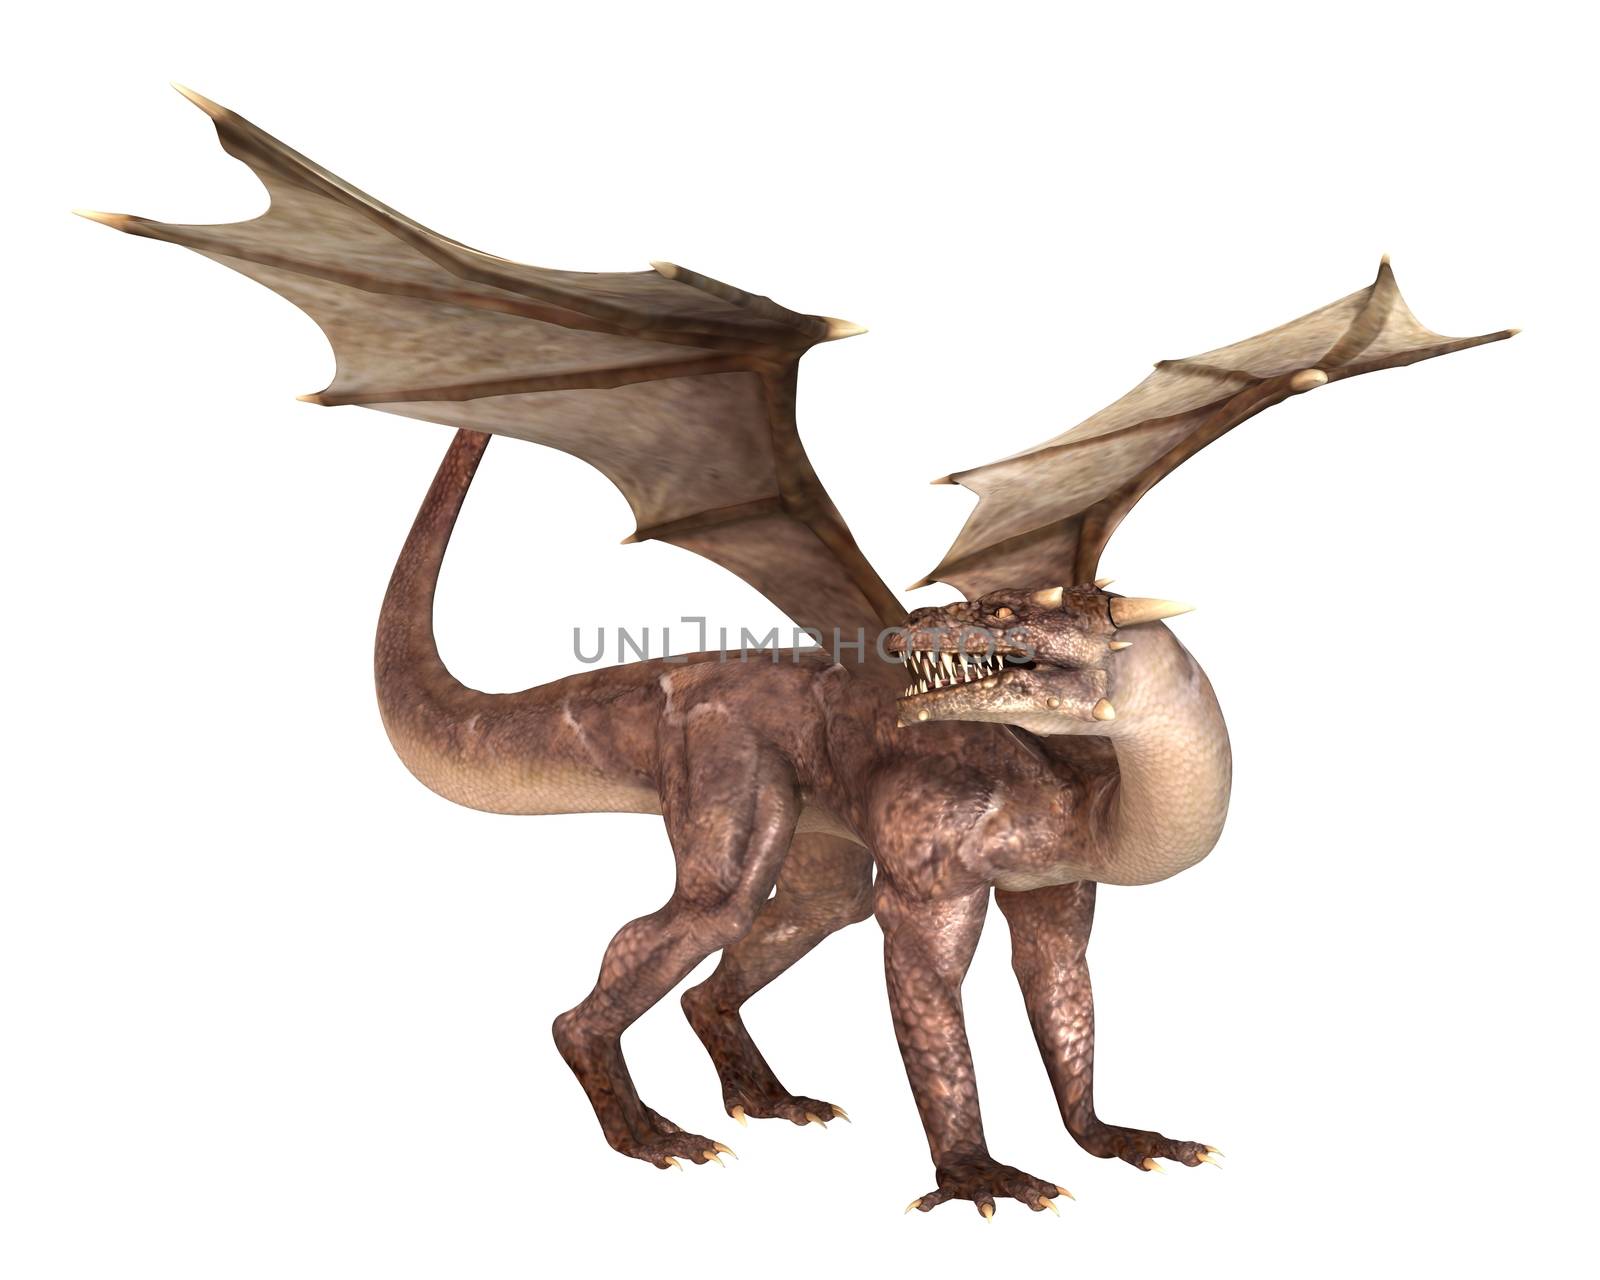 3D digital render of fantasy dragon isolated on white background